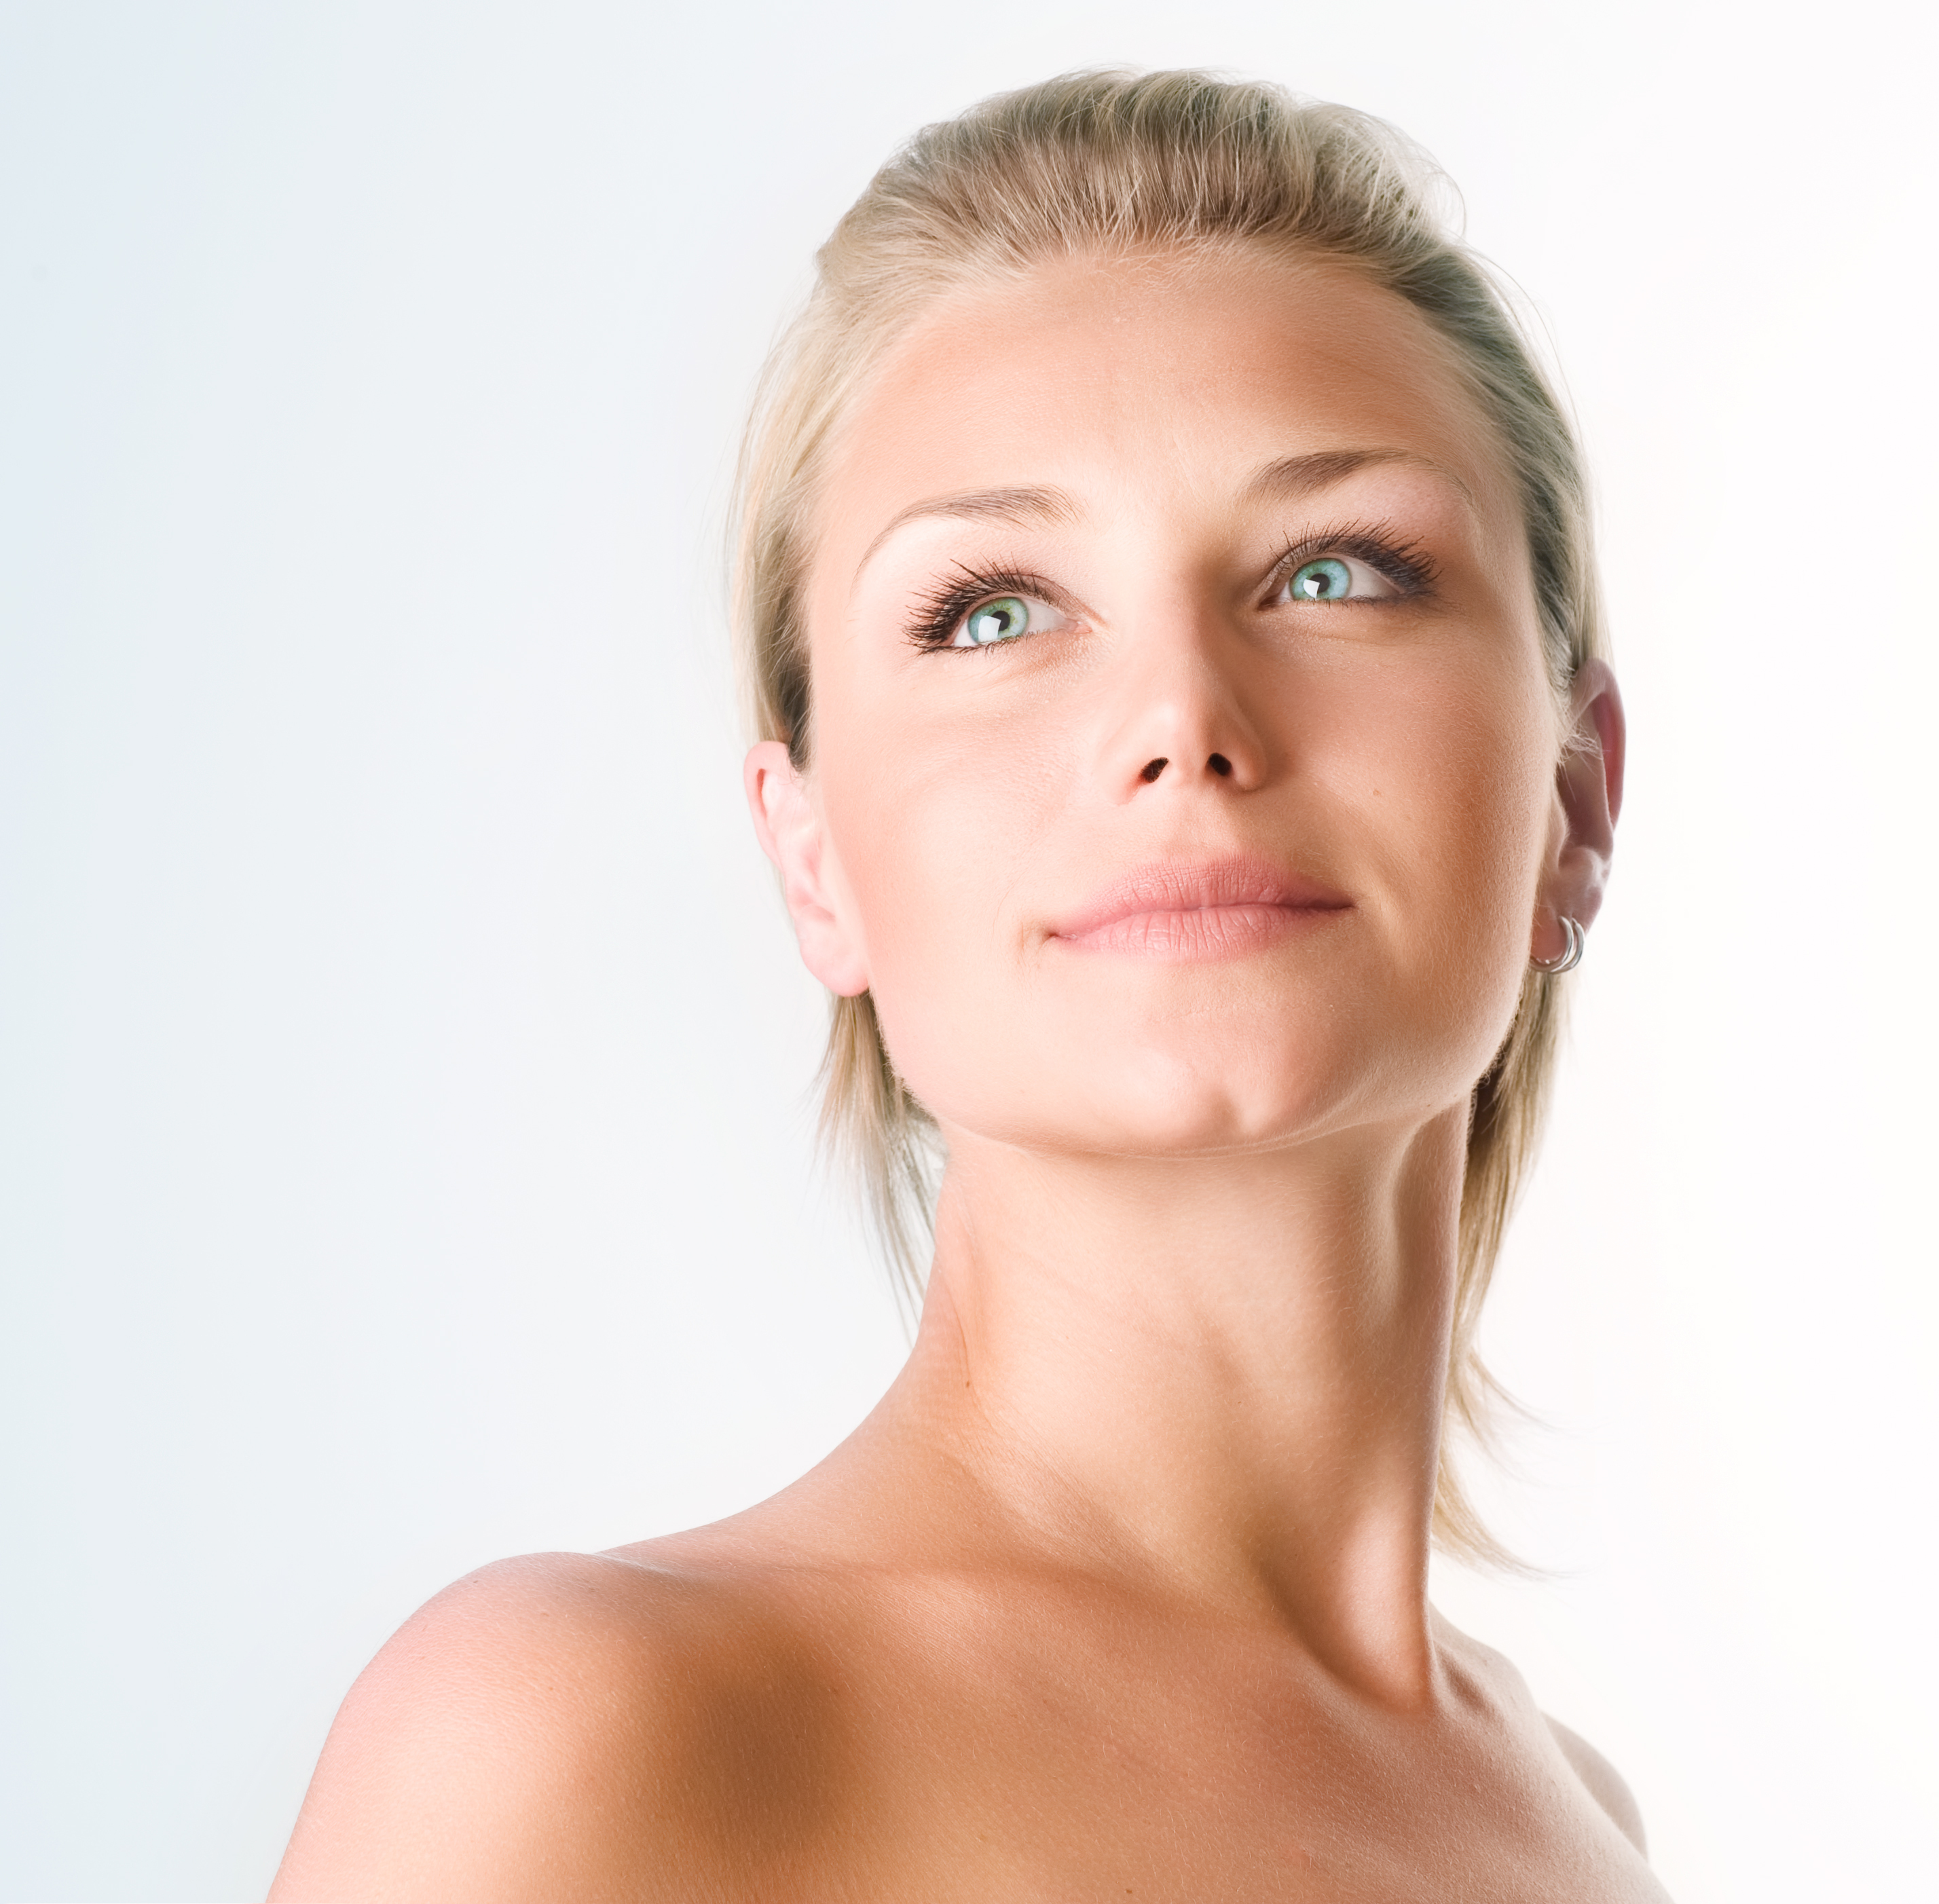 Facelift Plastic Surgery - Types, Cost, Recovery, & Risks